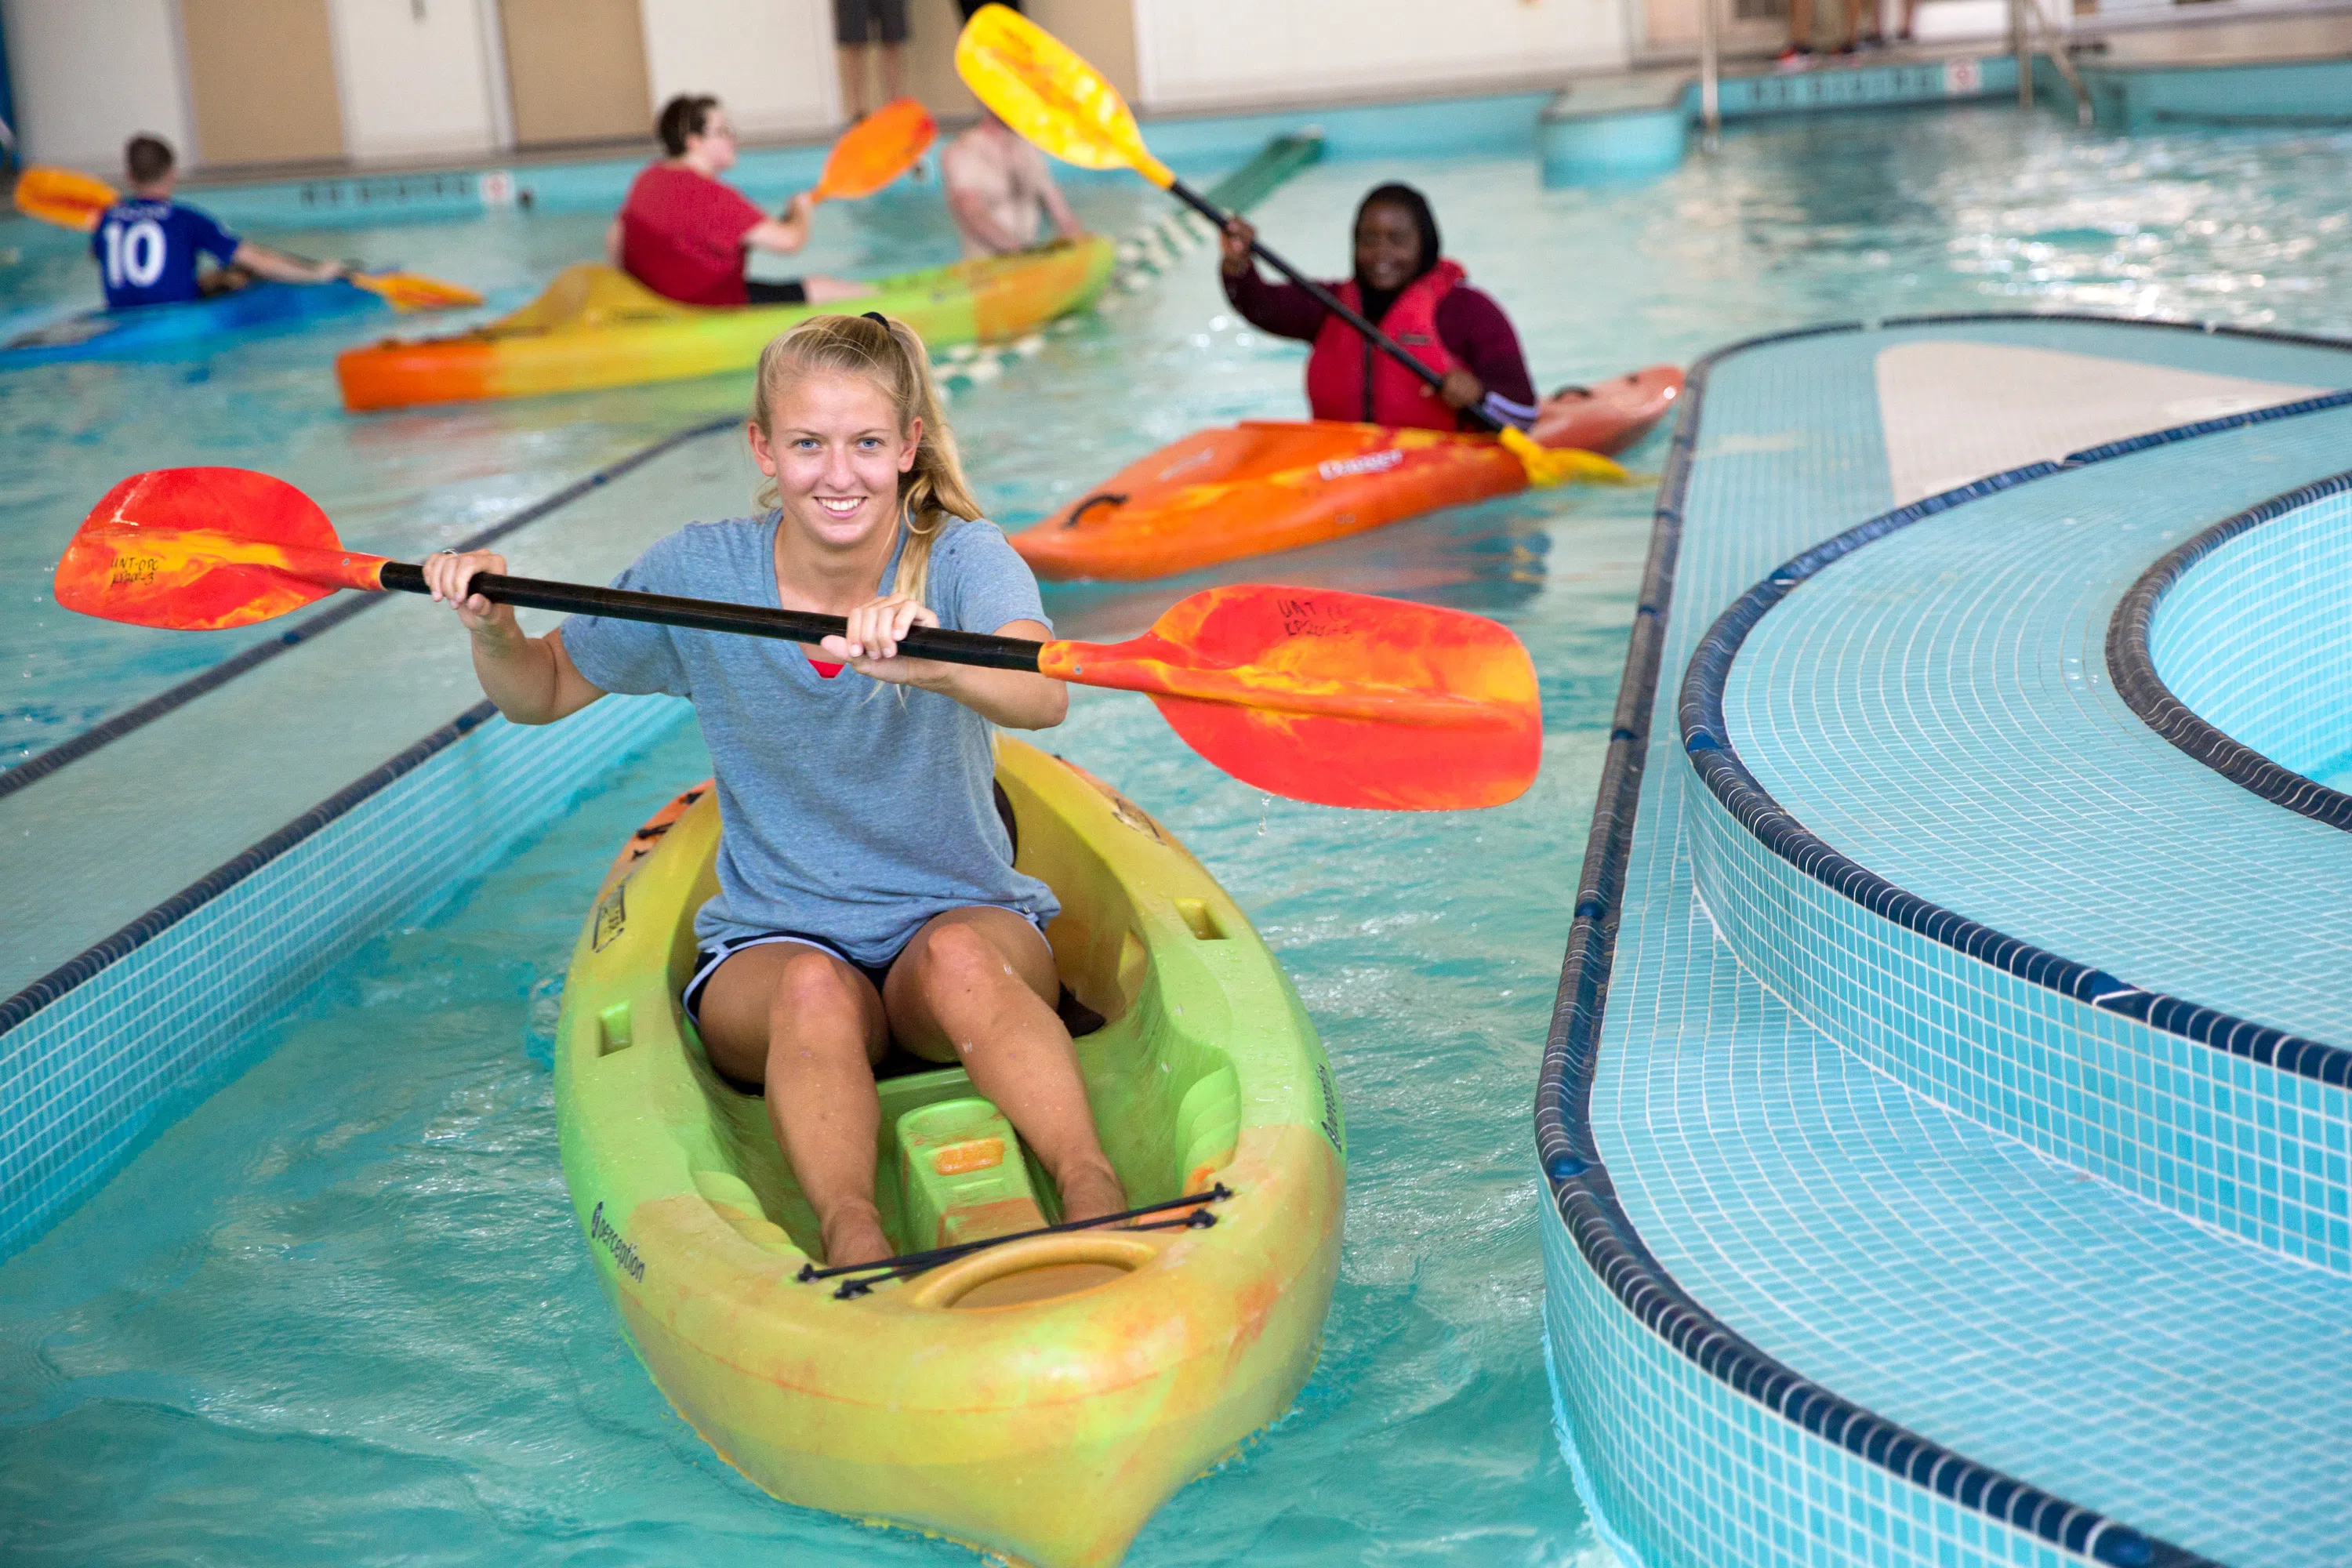 Student in a kayak in a pool. The student is paddling the kayak and smiling at the camera. 